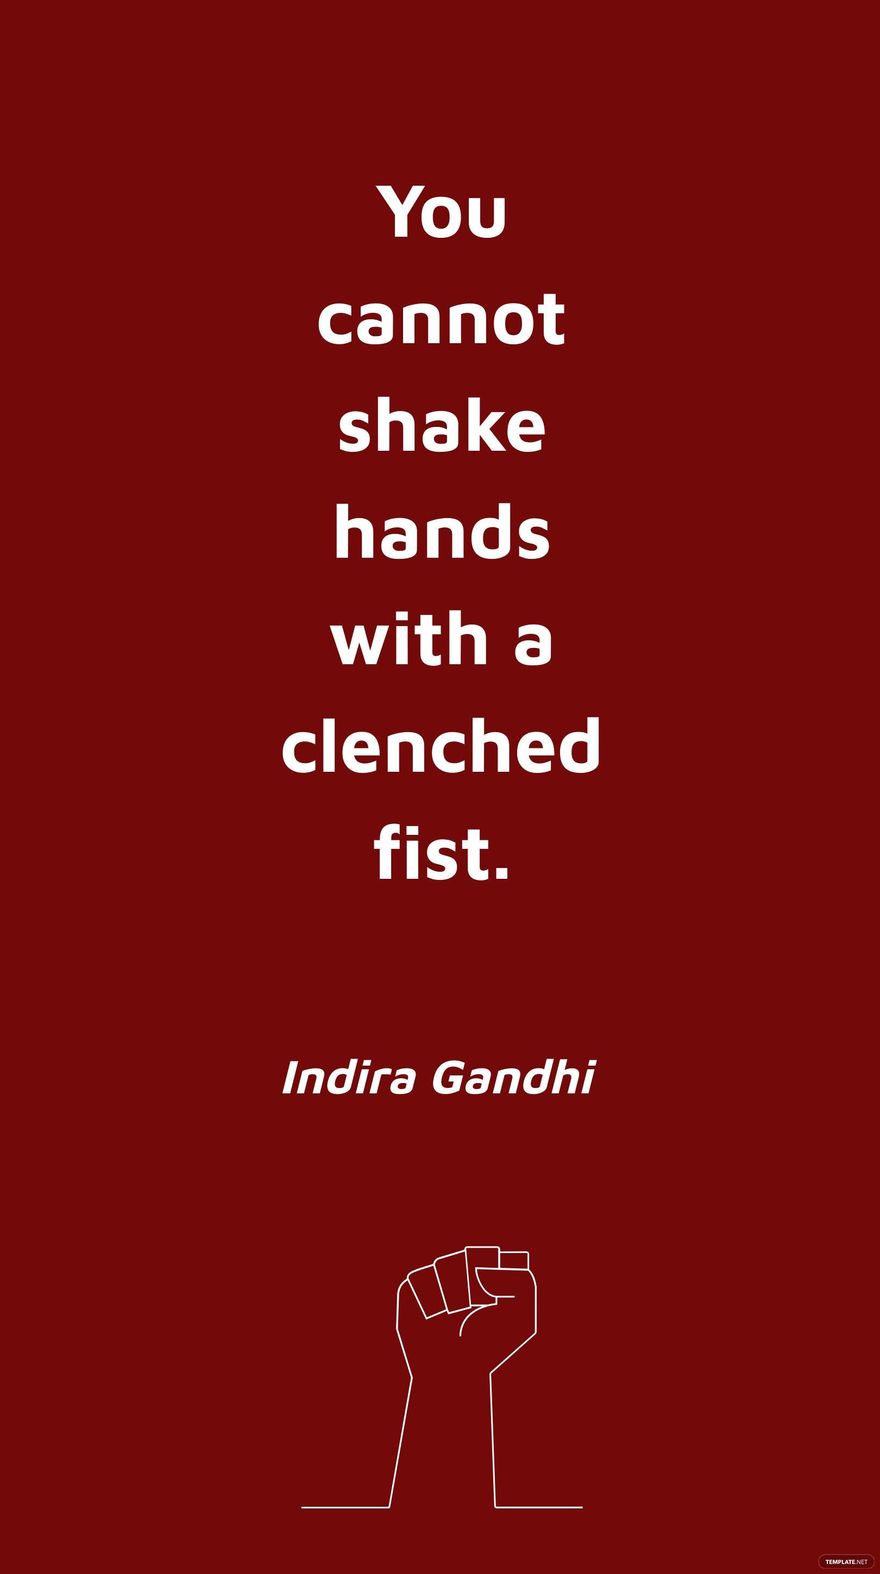 Indira Gandhi - You cannot shake hands with a clenched fist. in JPG